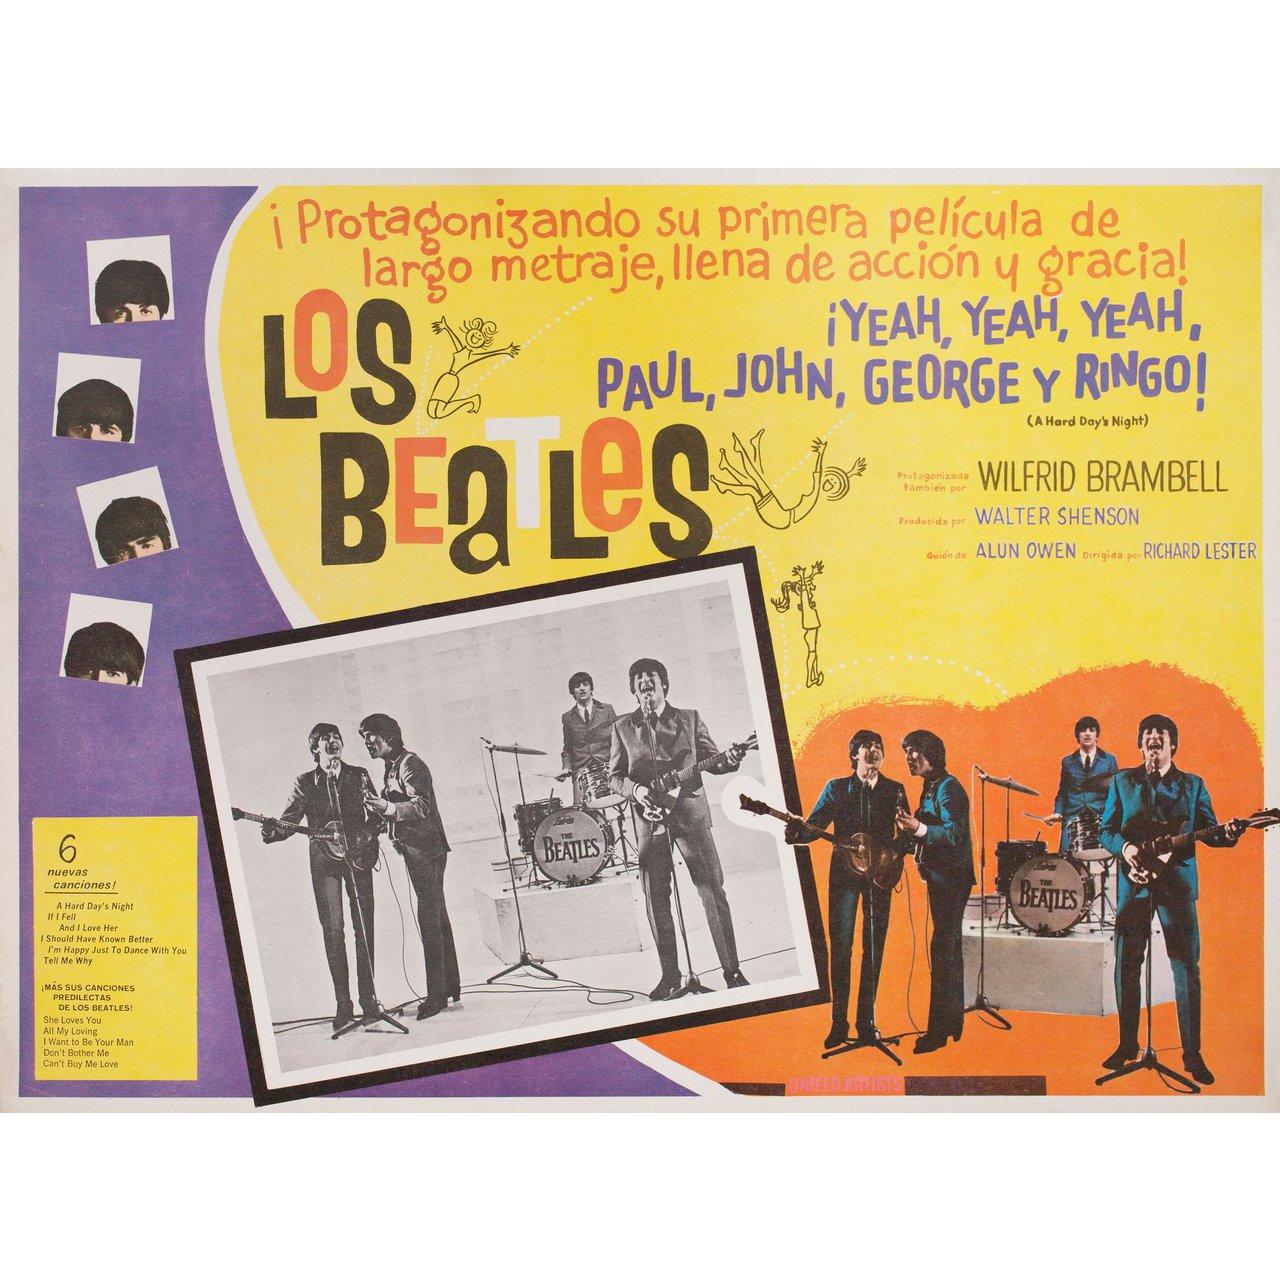 Original 1964 Mexican scene card for the film A Hard Day's Night directed by Richard Lester with The Beatles / John Lennon / Paul McCartney / George Harrison. Fine condition. Please note: the size is stated in inches and the actual size can vary by